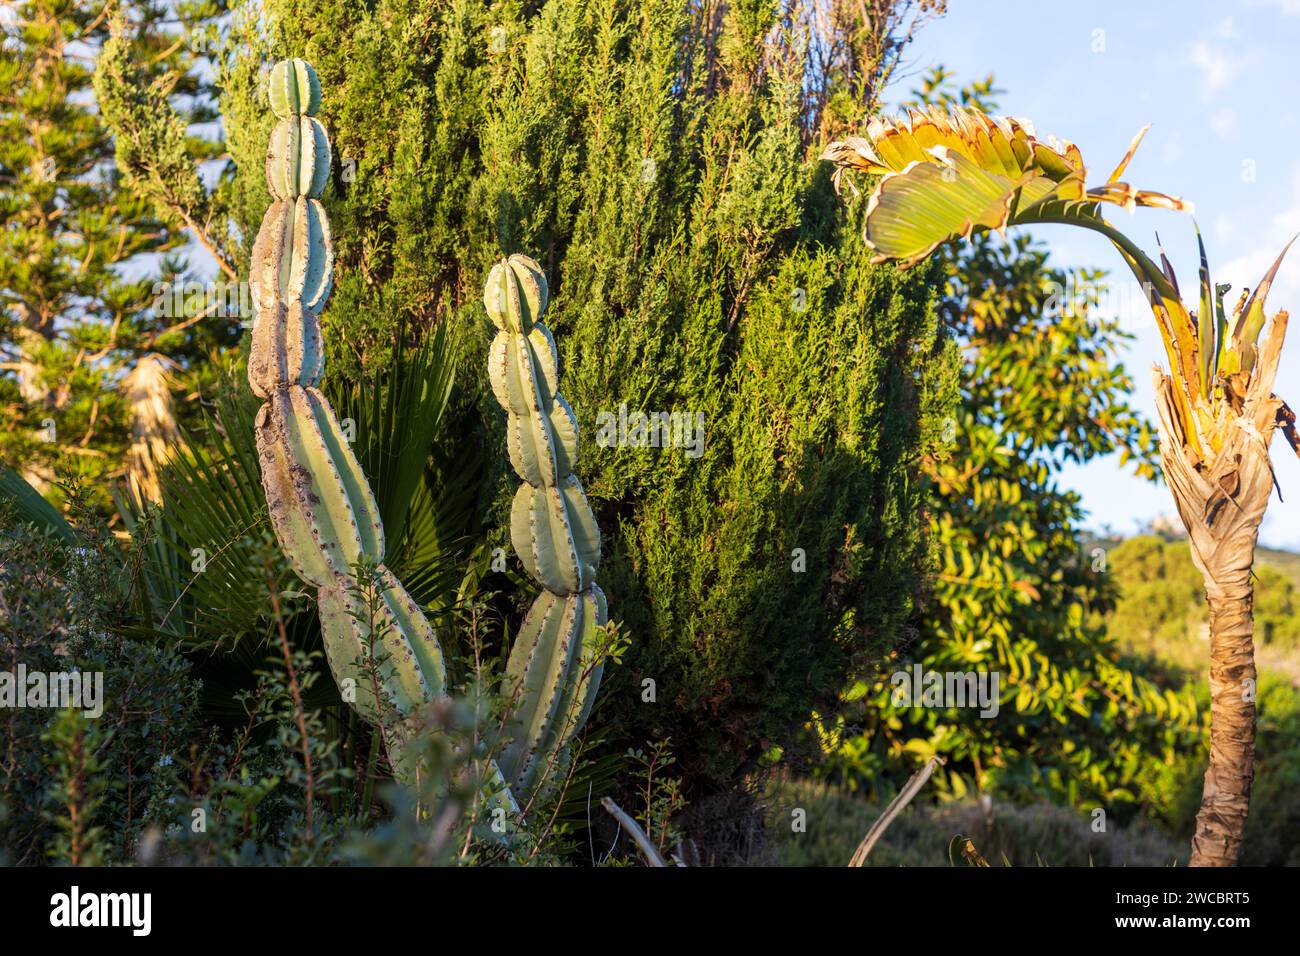 bottom view of a large prickly pear cactus against a blue sky. Israel Stock Photo